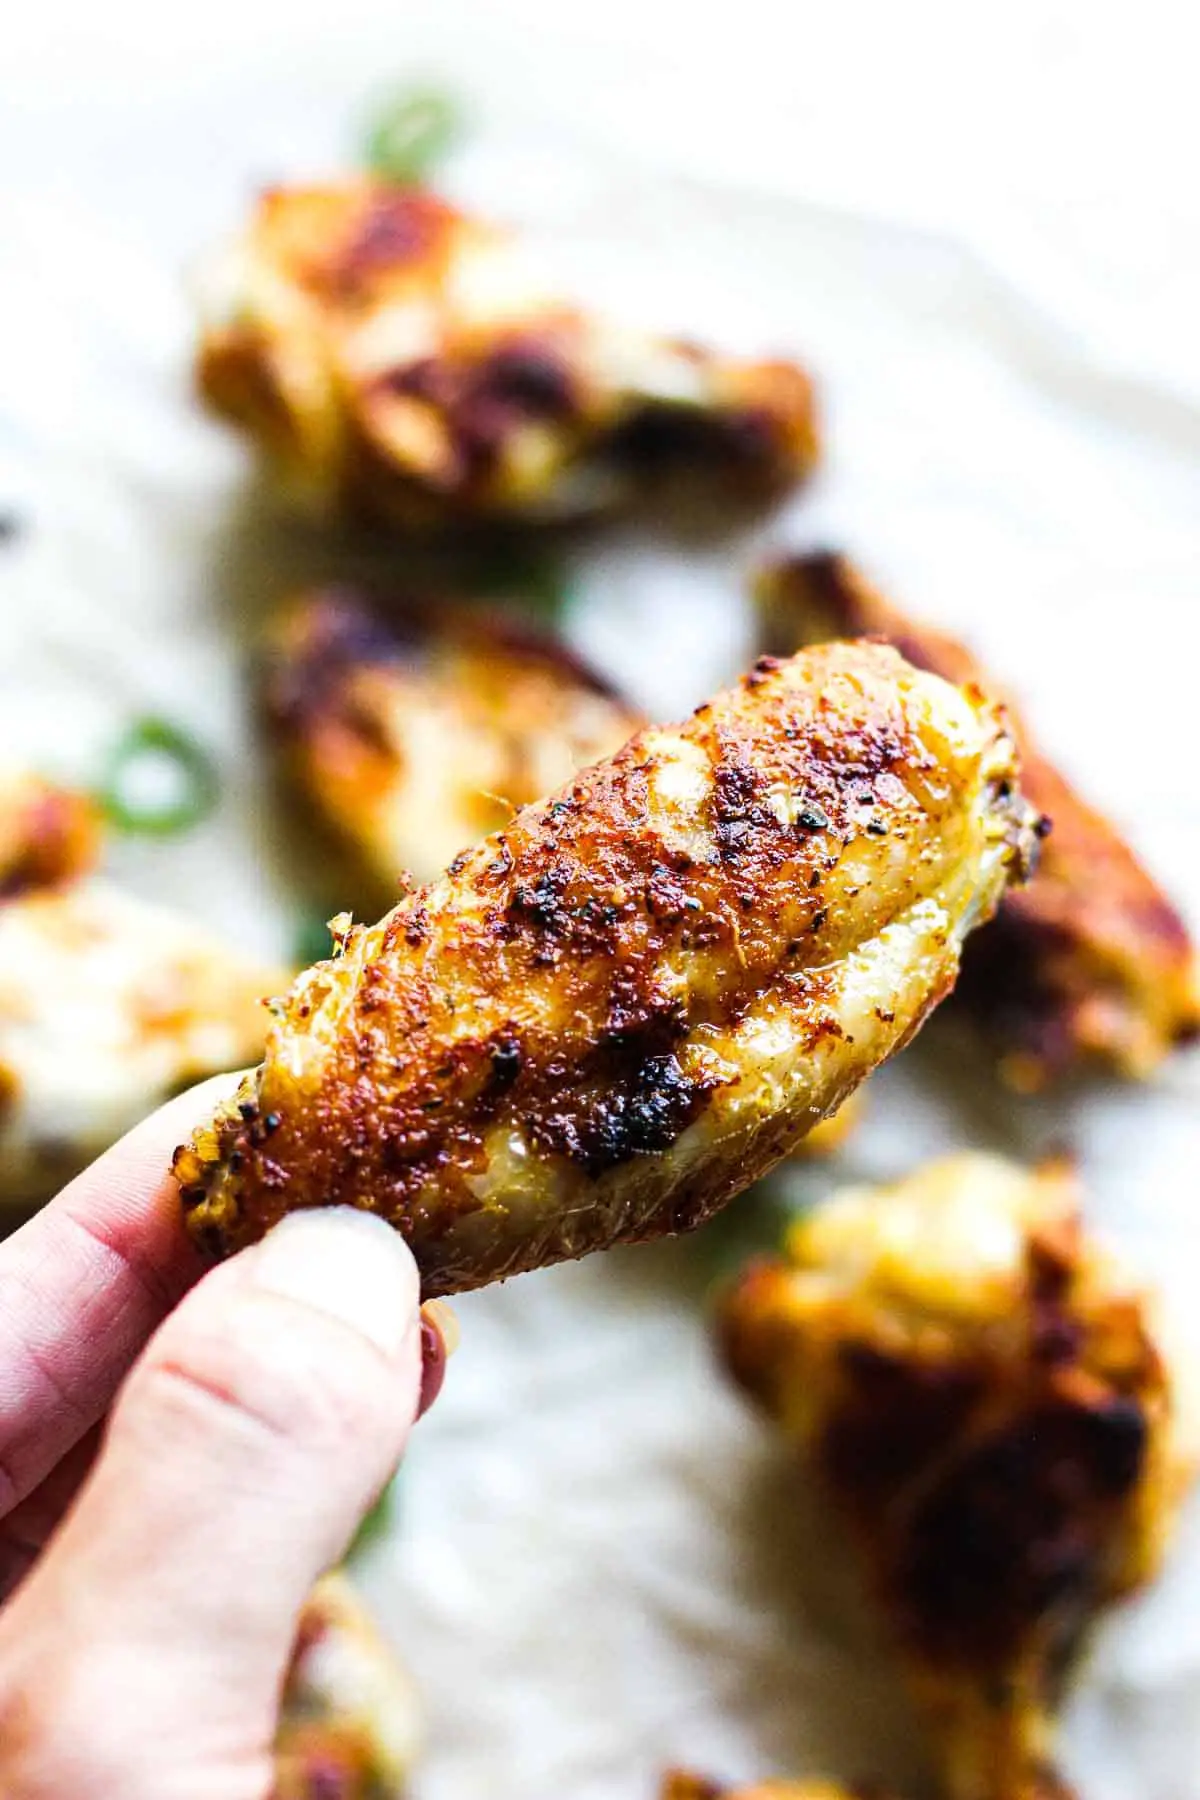 Frozen ranch chicken wings in air fryer (Tyson or other brand)